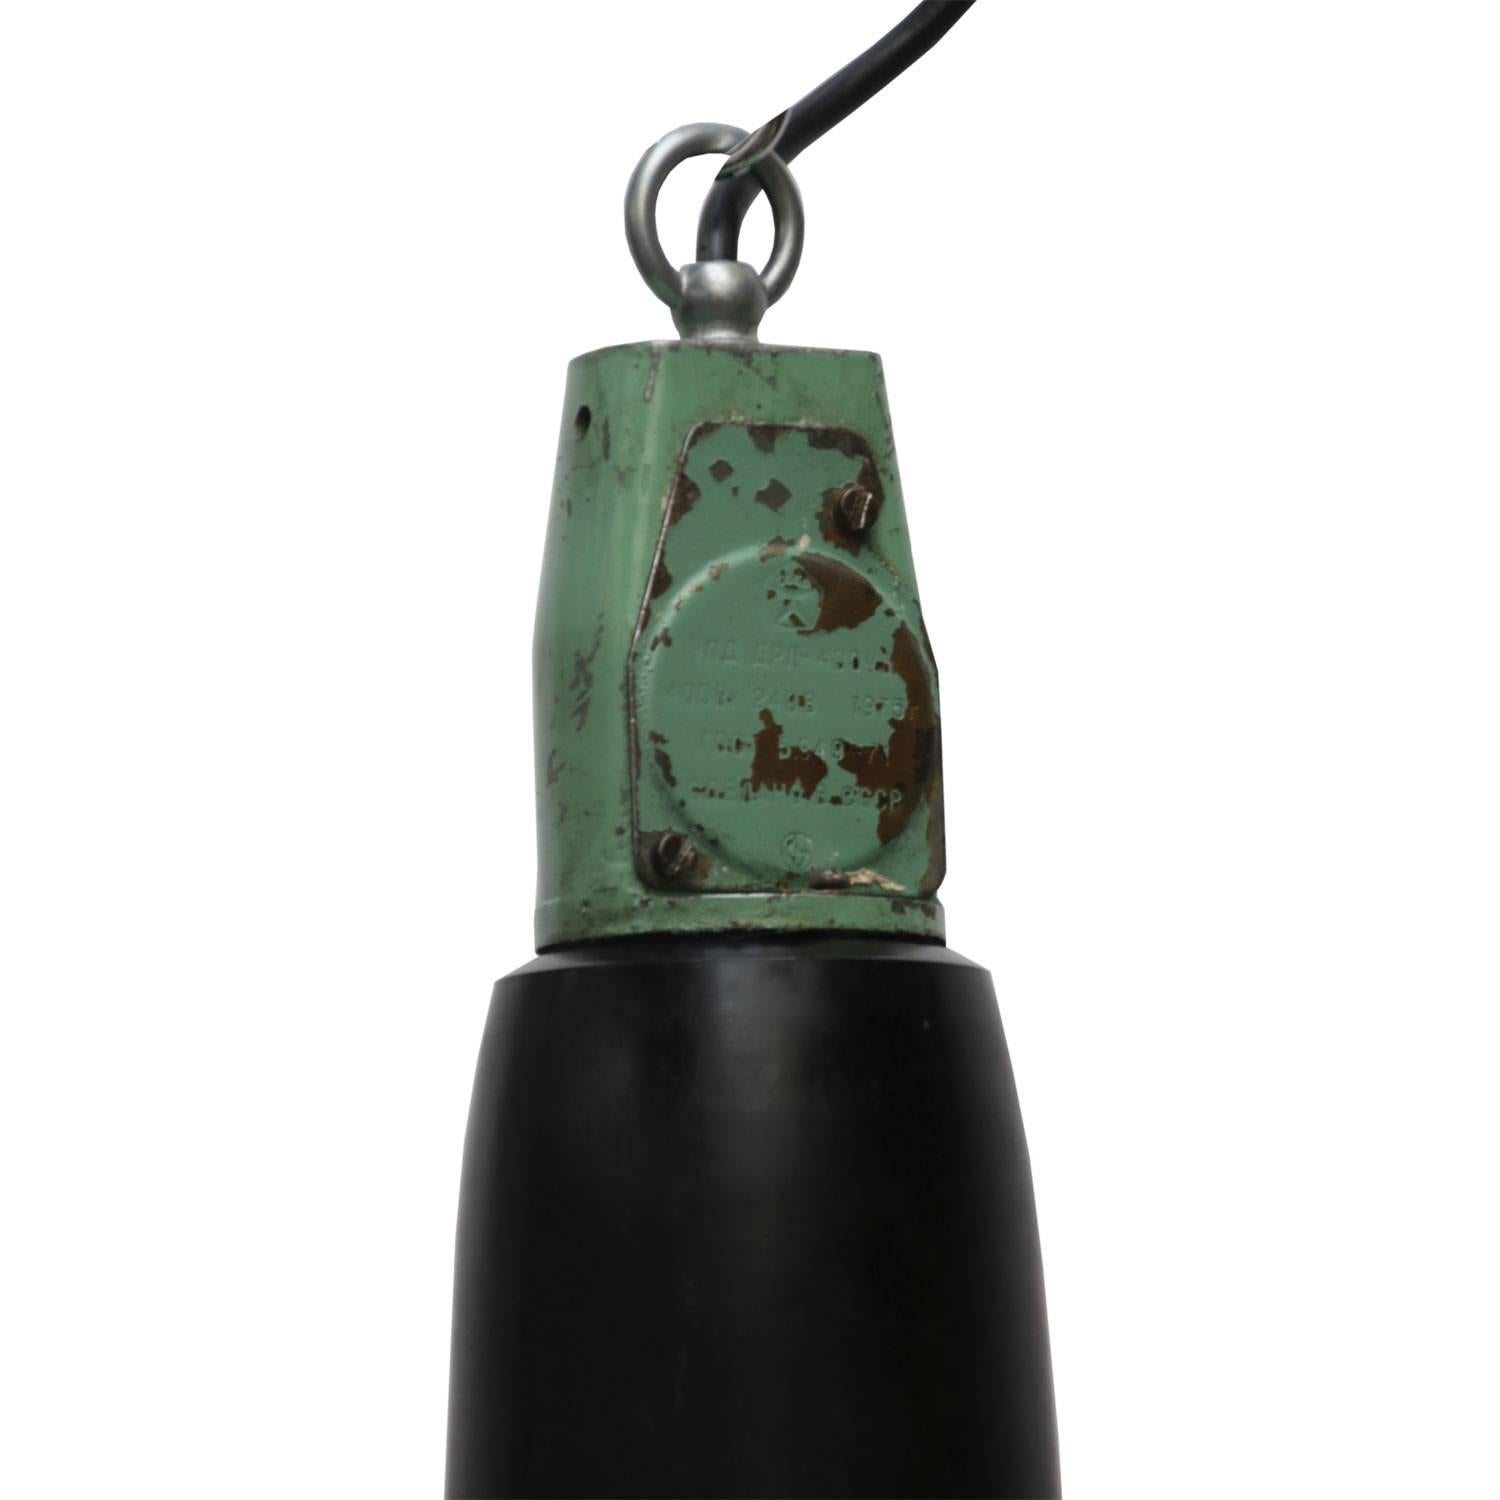 Olesko large. Enamel Industrial pendant. Green enamel shade, white inside.
Bakelite top.

All lamps have been made suitable by international standards for incandescent light bulbs, energy-efficient and LED bulbs with an E26/E27 socket, new wiring